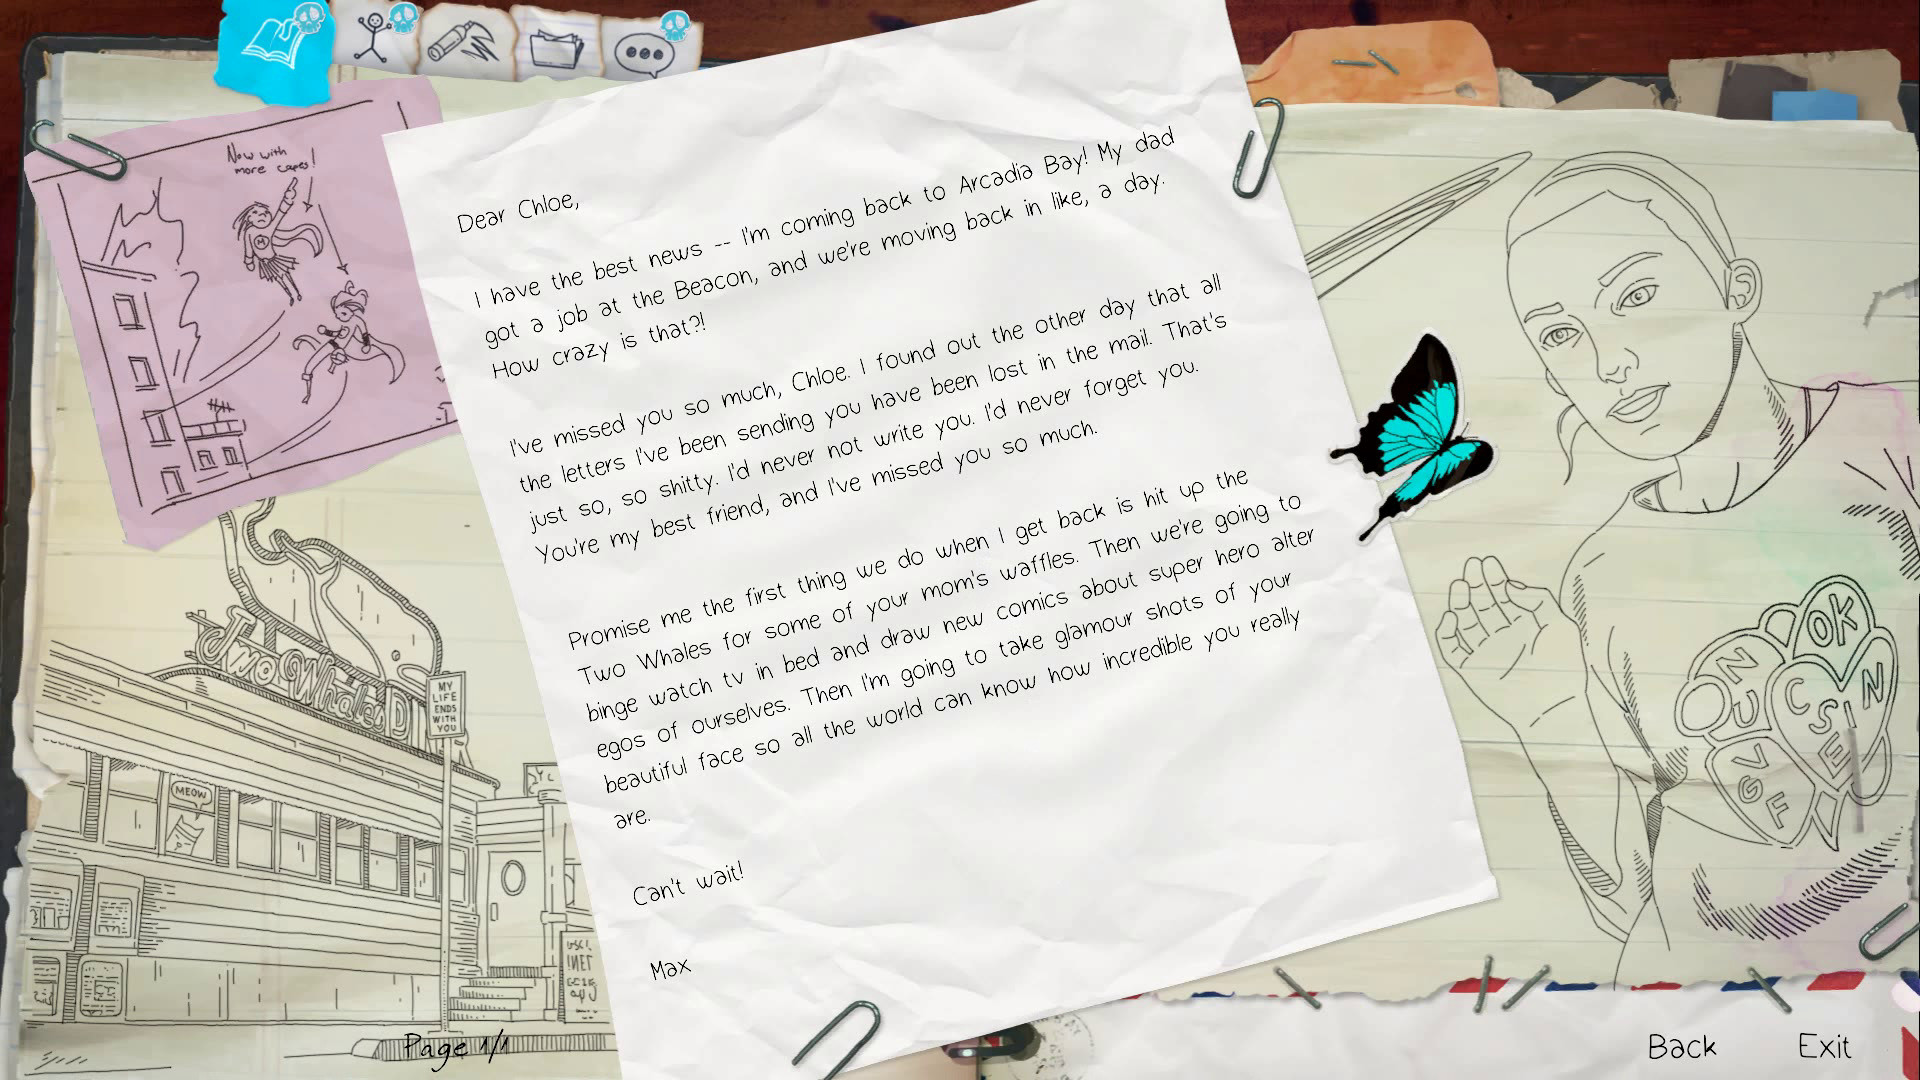 1920x1080 Max's excusing letter to Chloe in her dream journal.